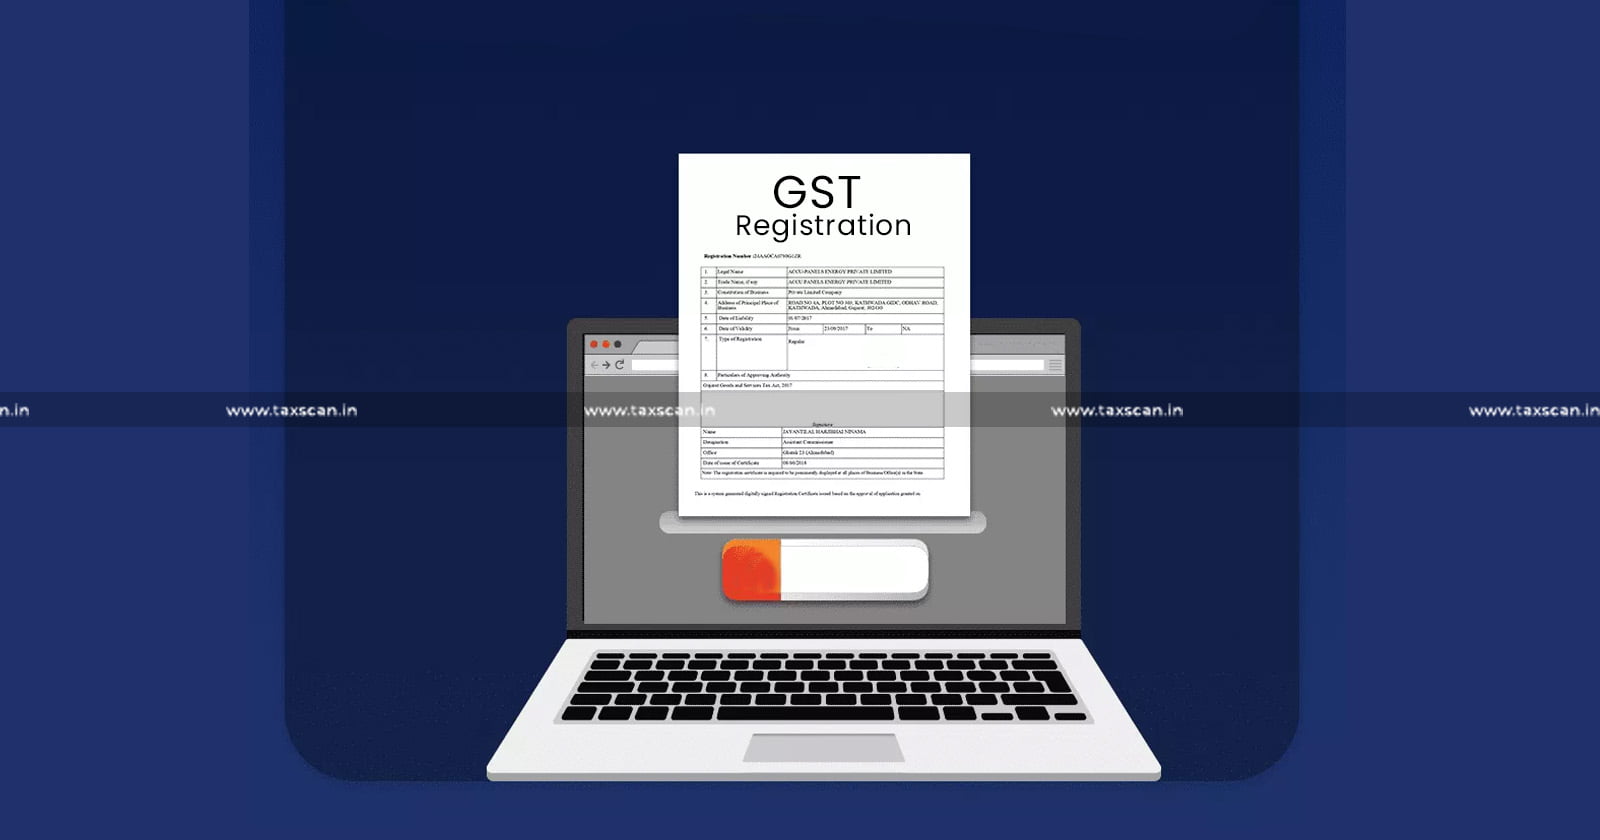 GST Registration in Name of Fictitious Company - GST Registration - GST - Fictitious Company - Punjab and Haryana High Court - Punjab and Haryana High Court rejects Anticipatory Bail - Taxscan